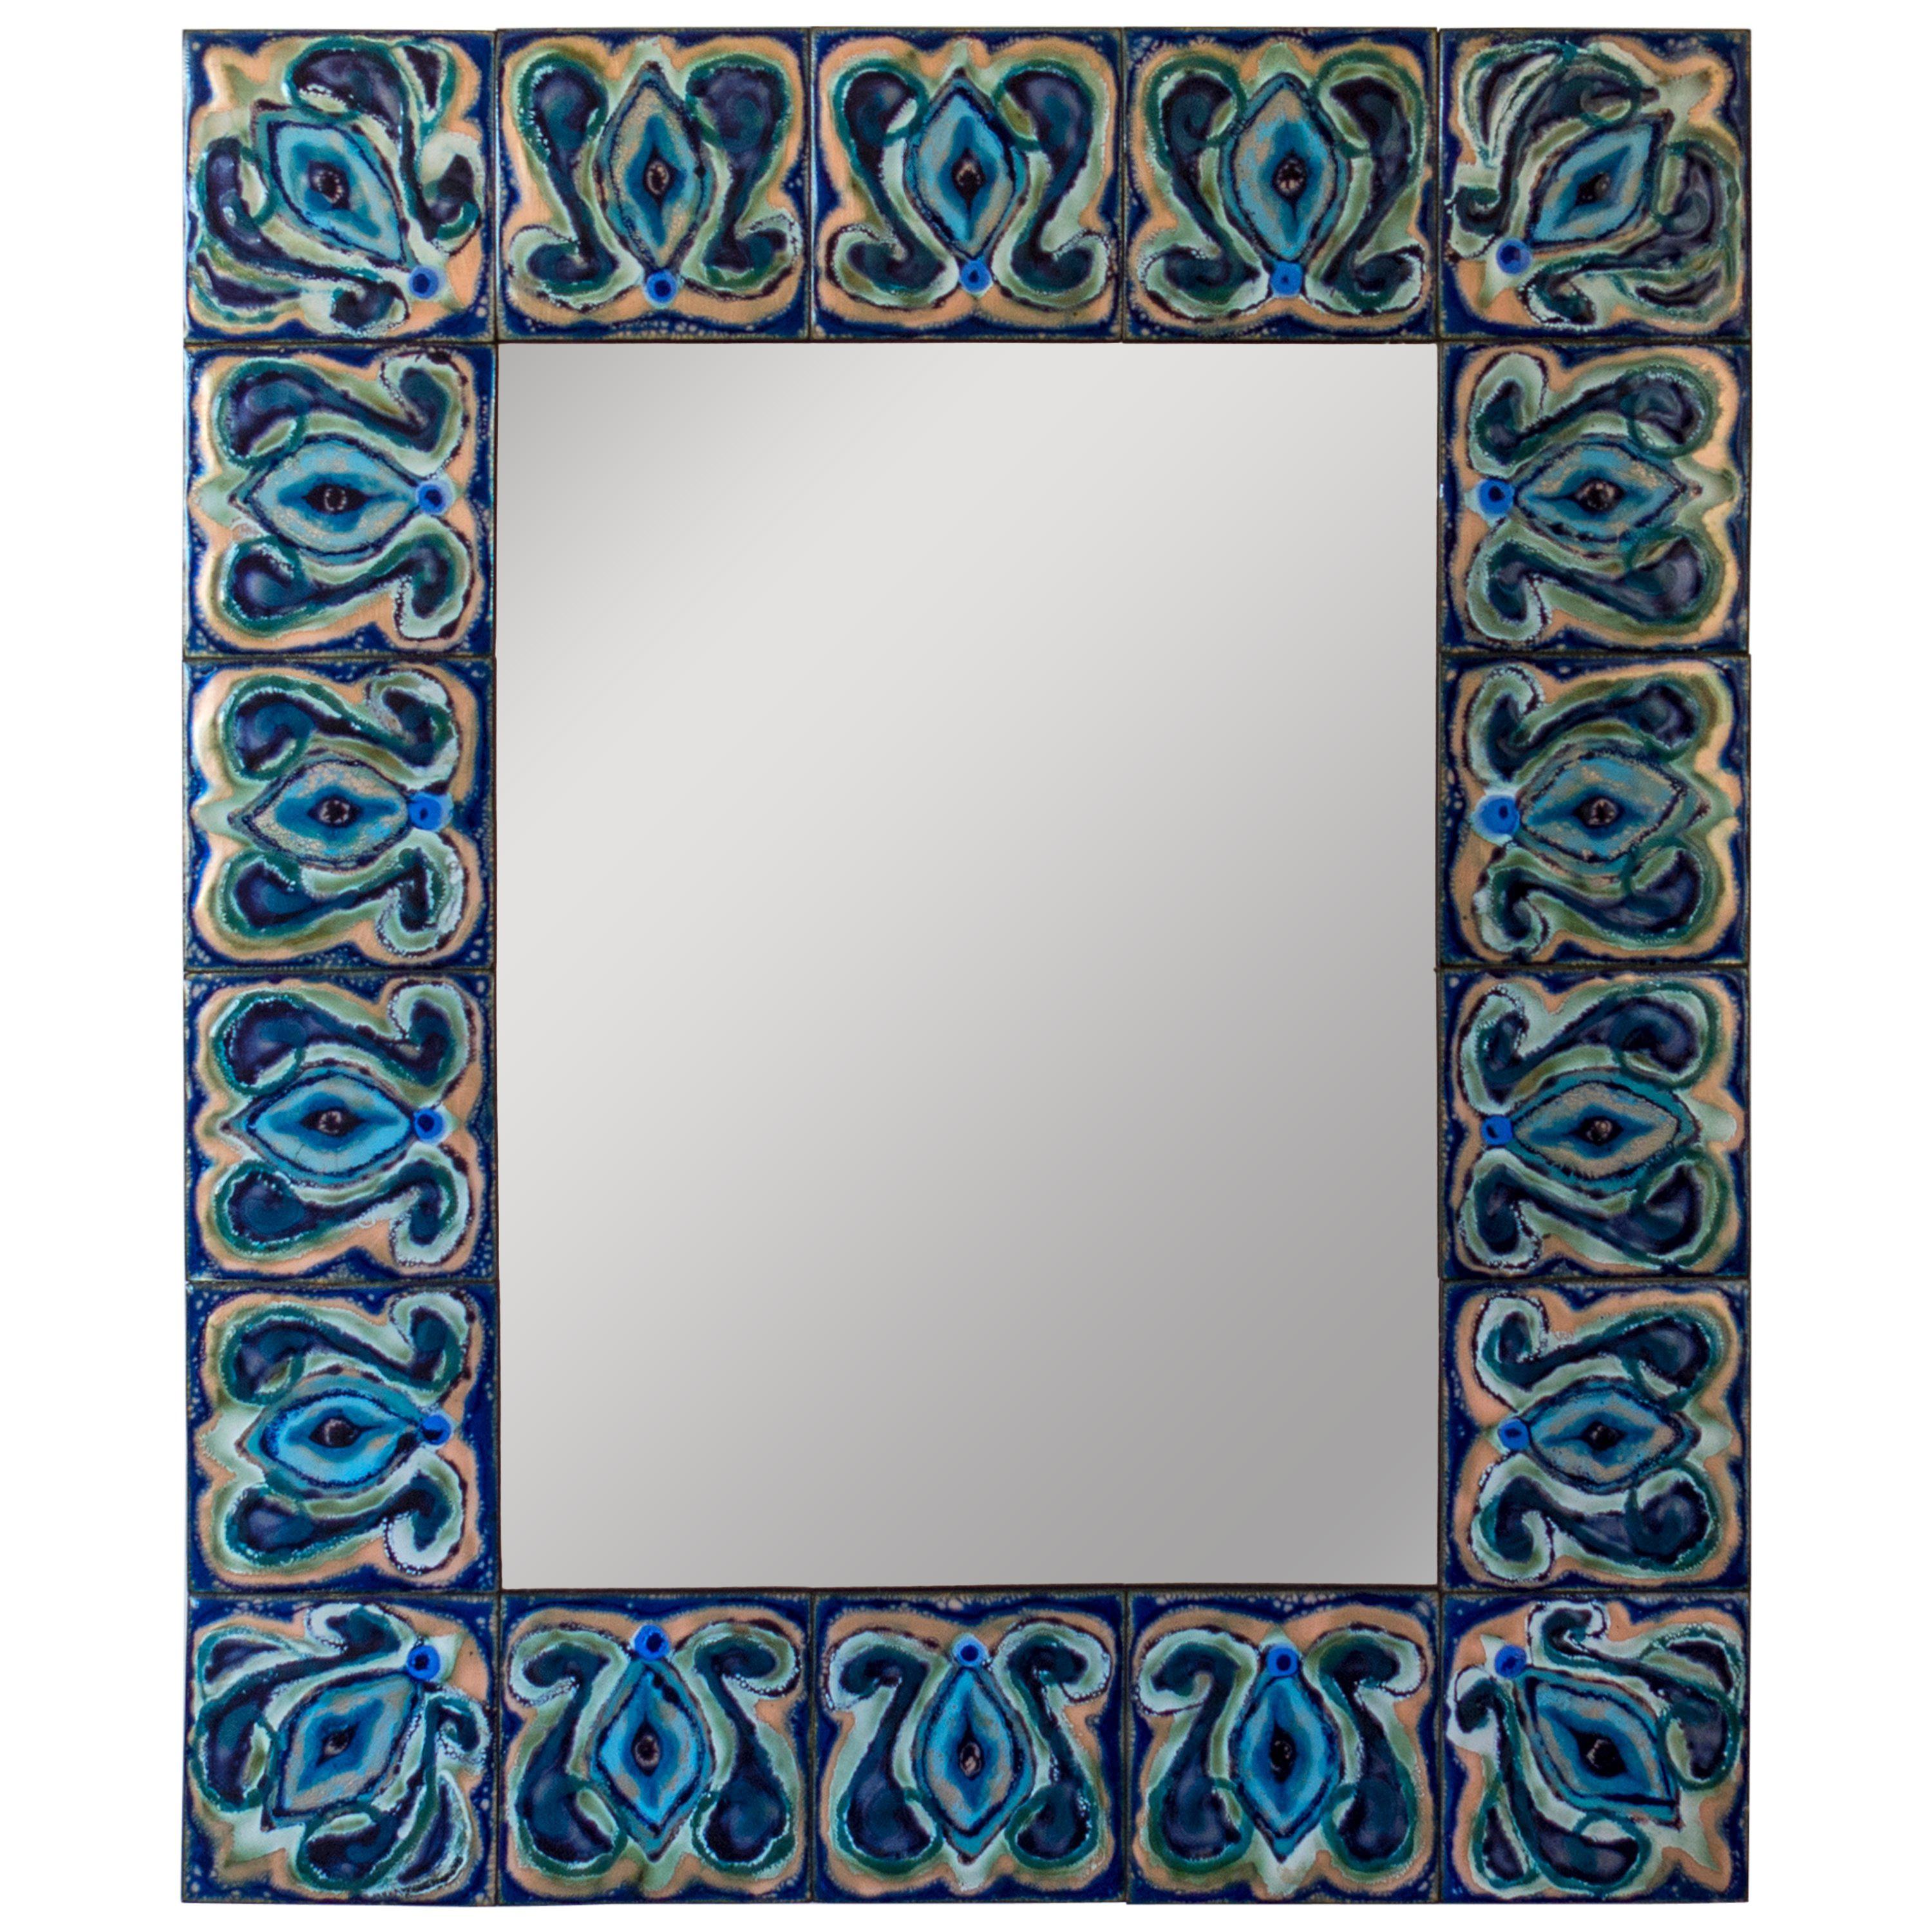 Bodil Eje, Unique Evergreen and Cobalt Enameled Copper Rectangular Wall Mirror